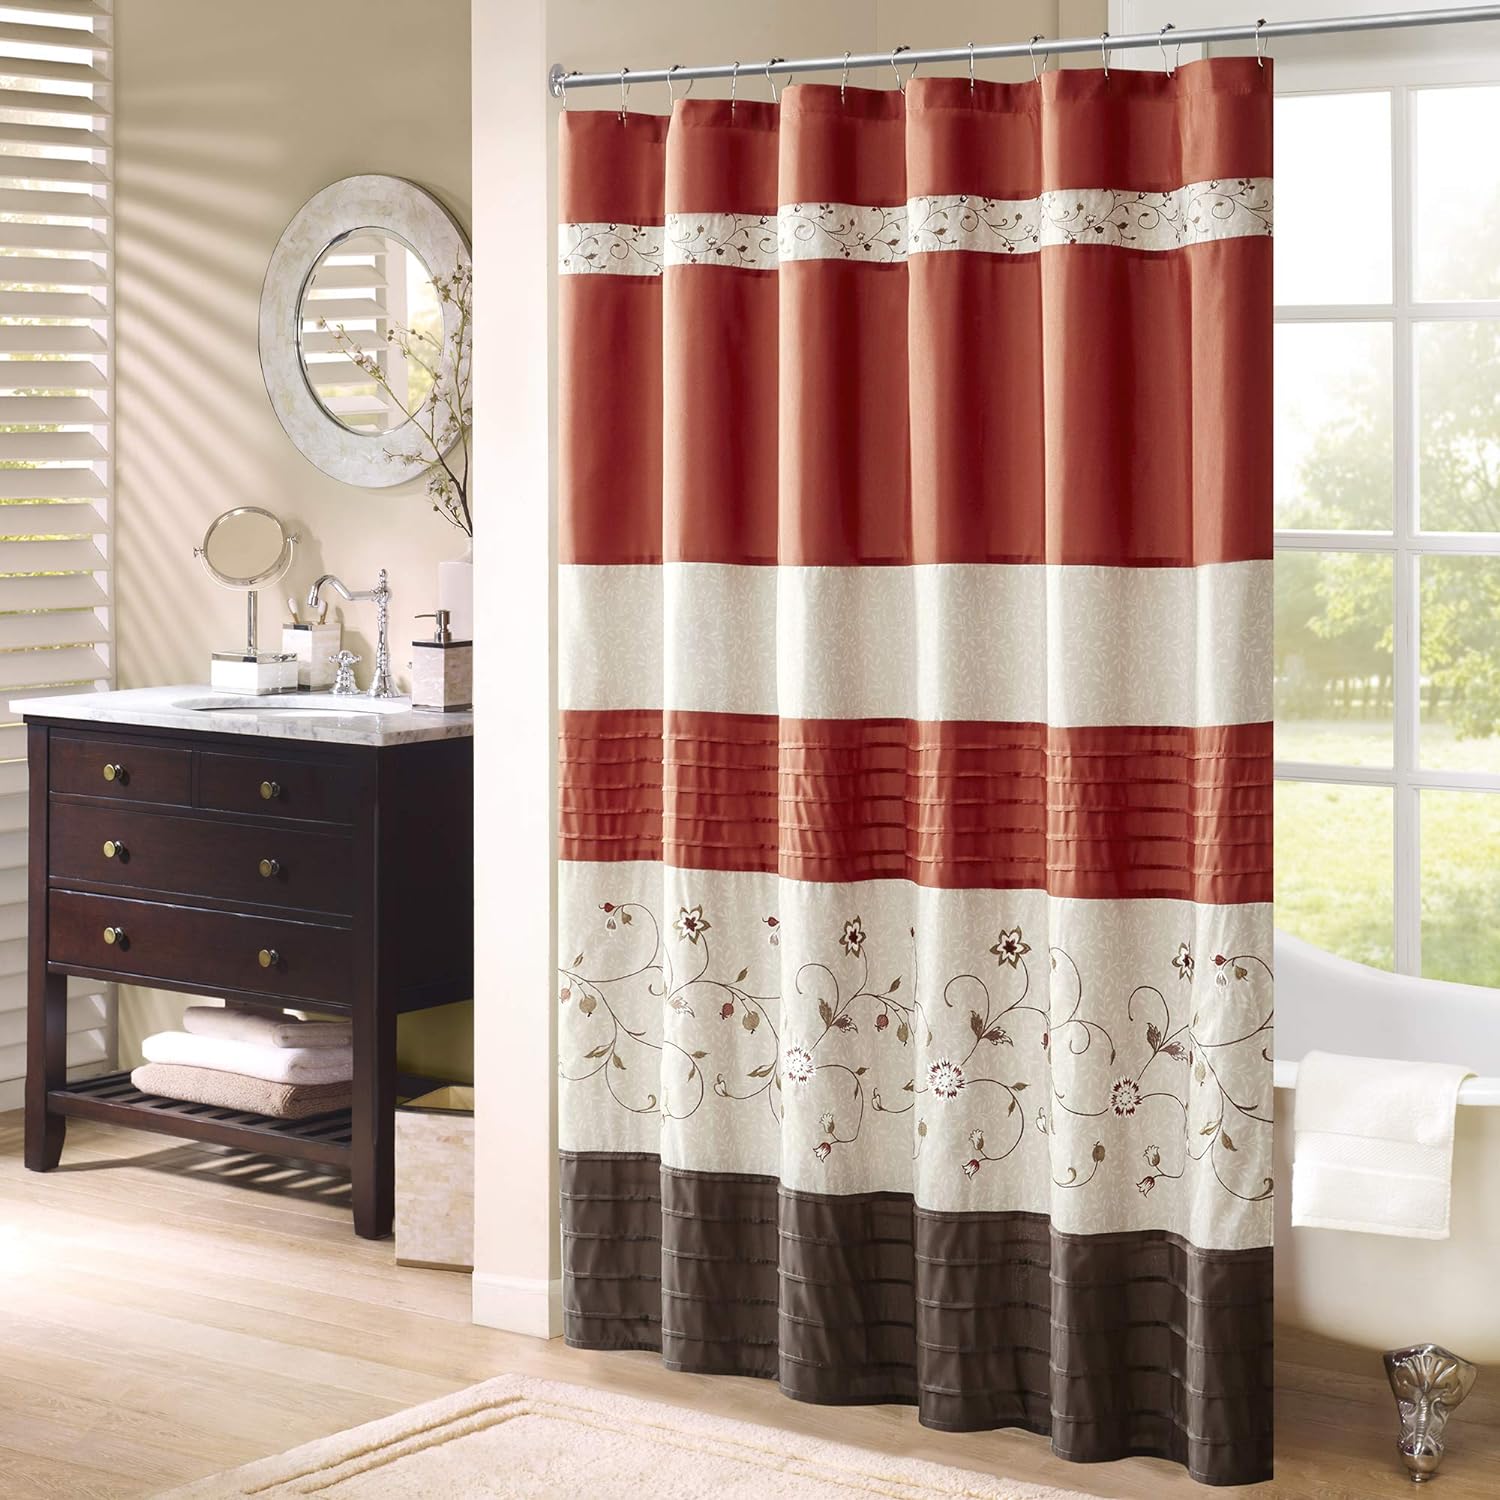 Discover Your Ideal Shower Curtain Style